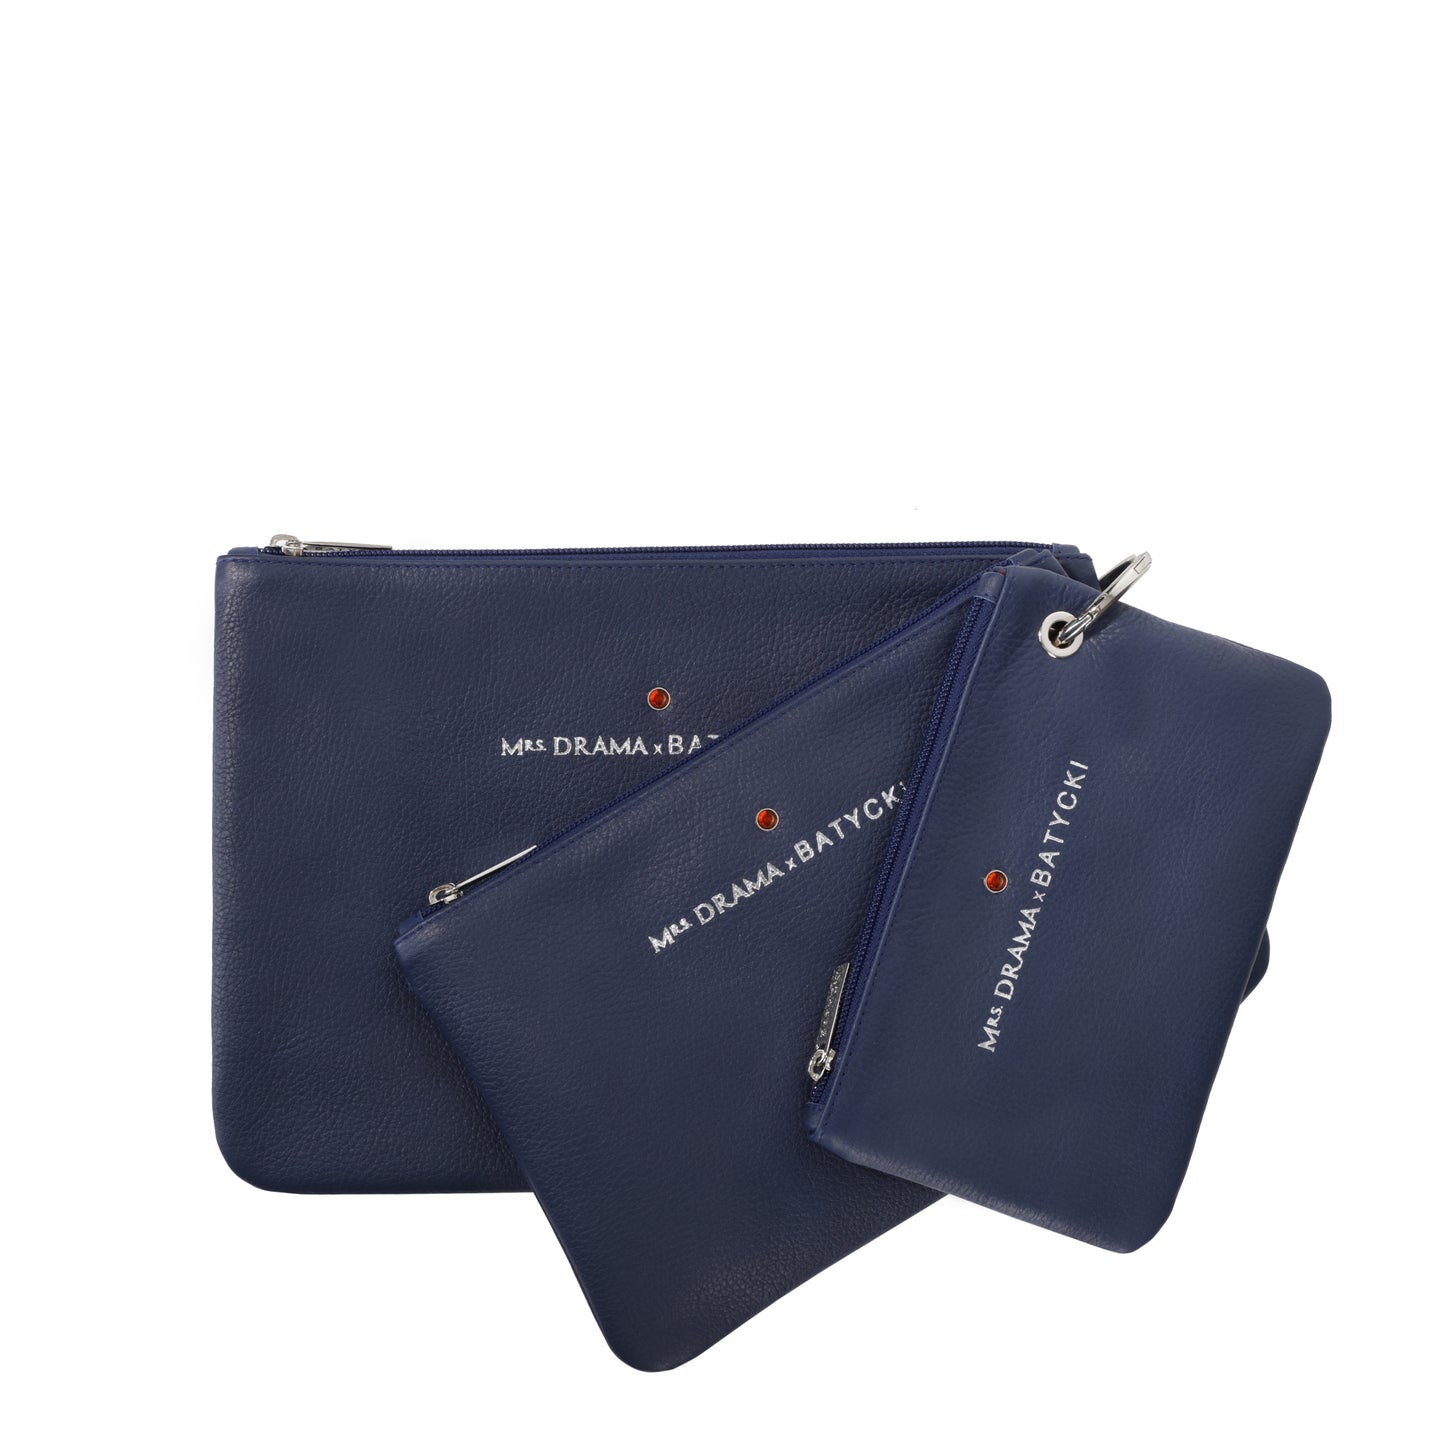 Set of three MRS DRAMA x BATYCKI mousse navy leather cosmetic bags